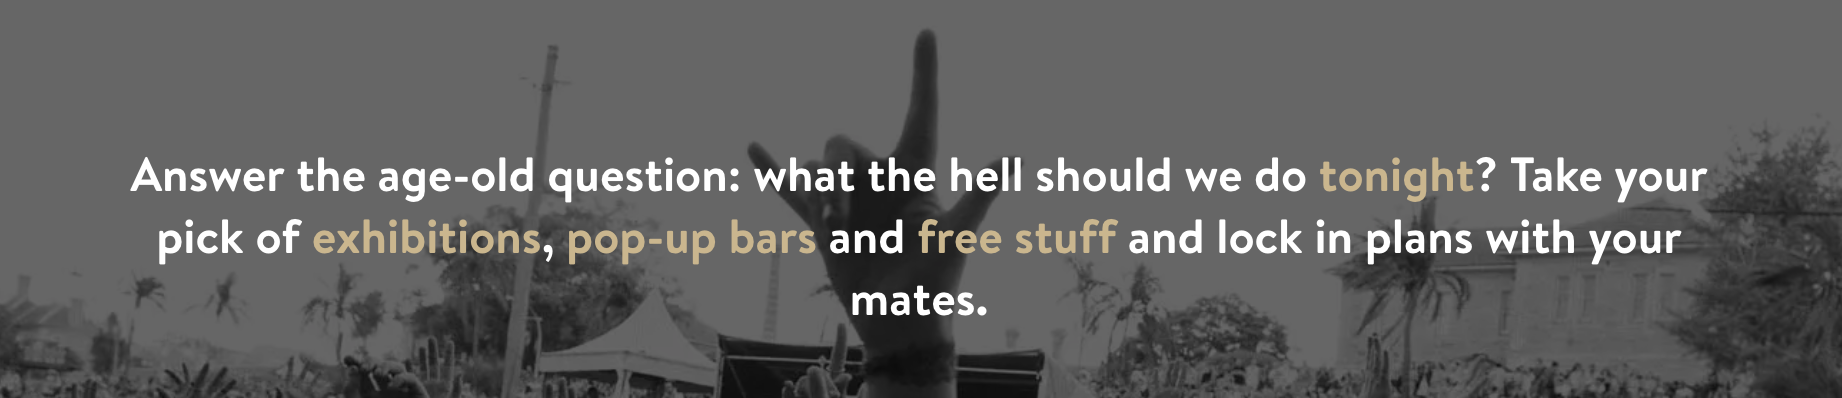 Answer the age old question: "what the hell should we do tonight?" Take your pick of exhibitions, pop-up bars, and free stuff and lock in plans with your mates.